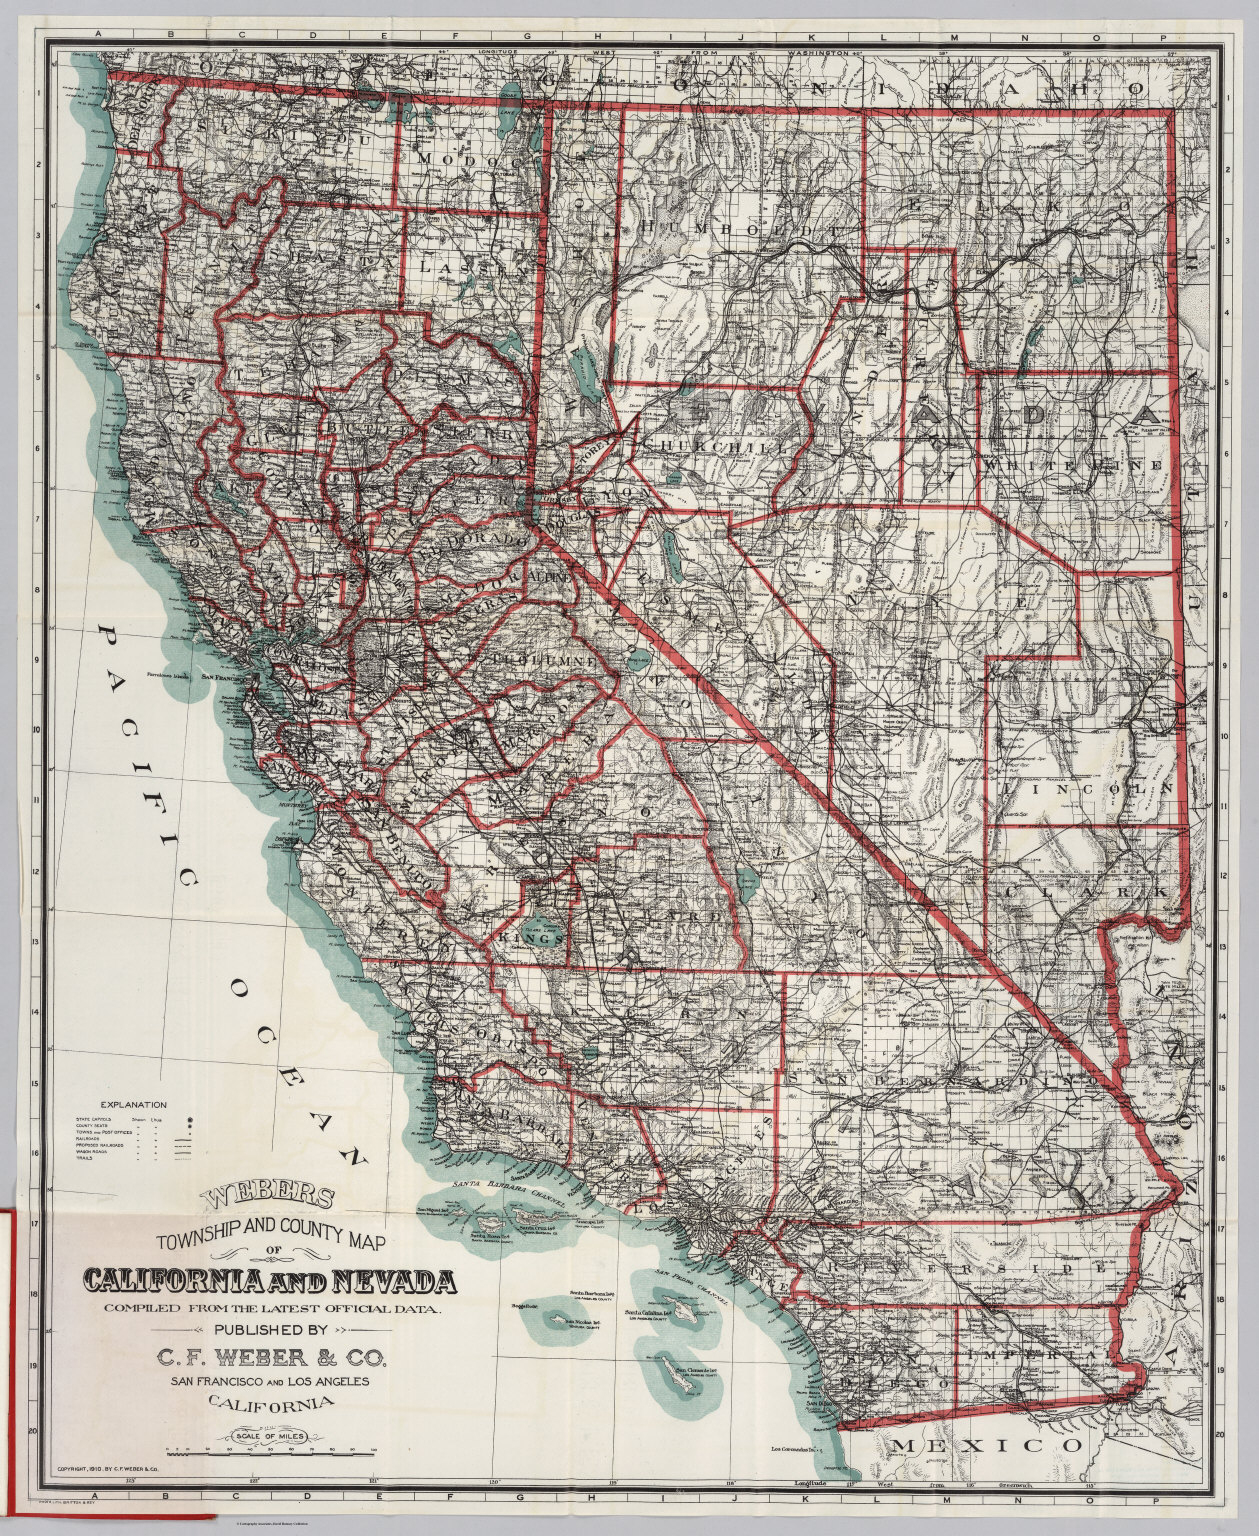 California State Map Maps Of California And Nevada - Klipy - Map Of California And Nevada